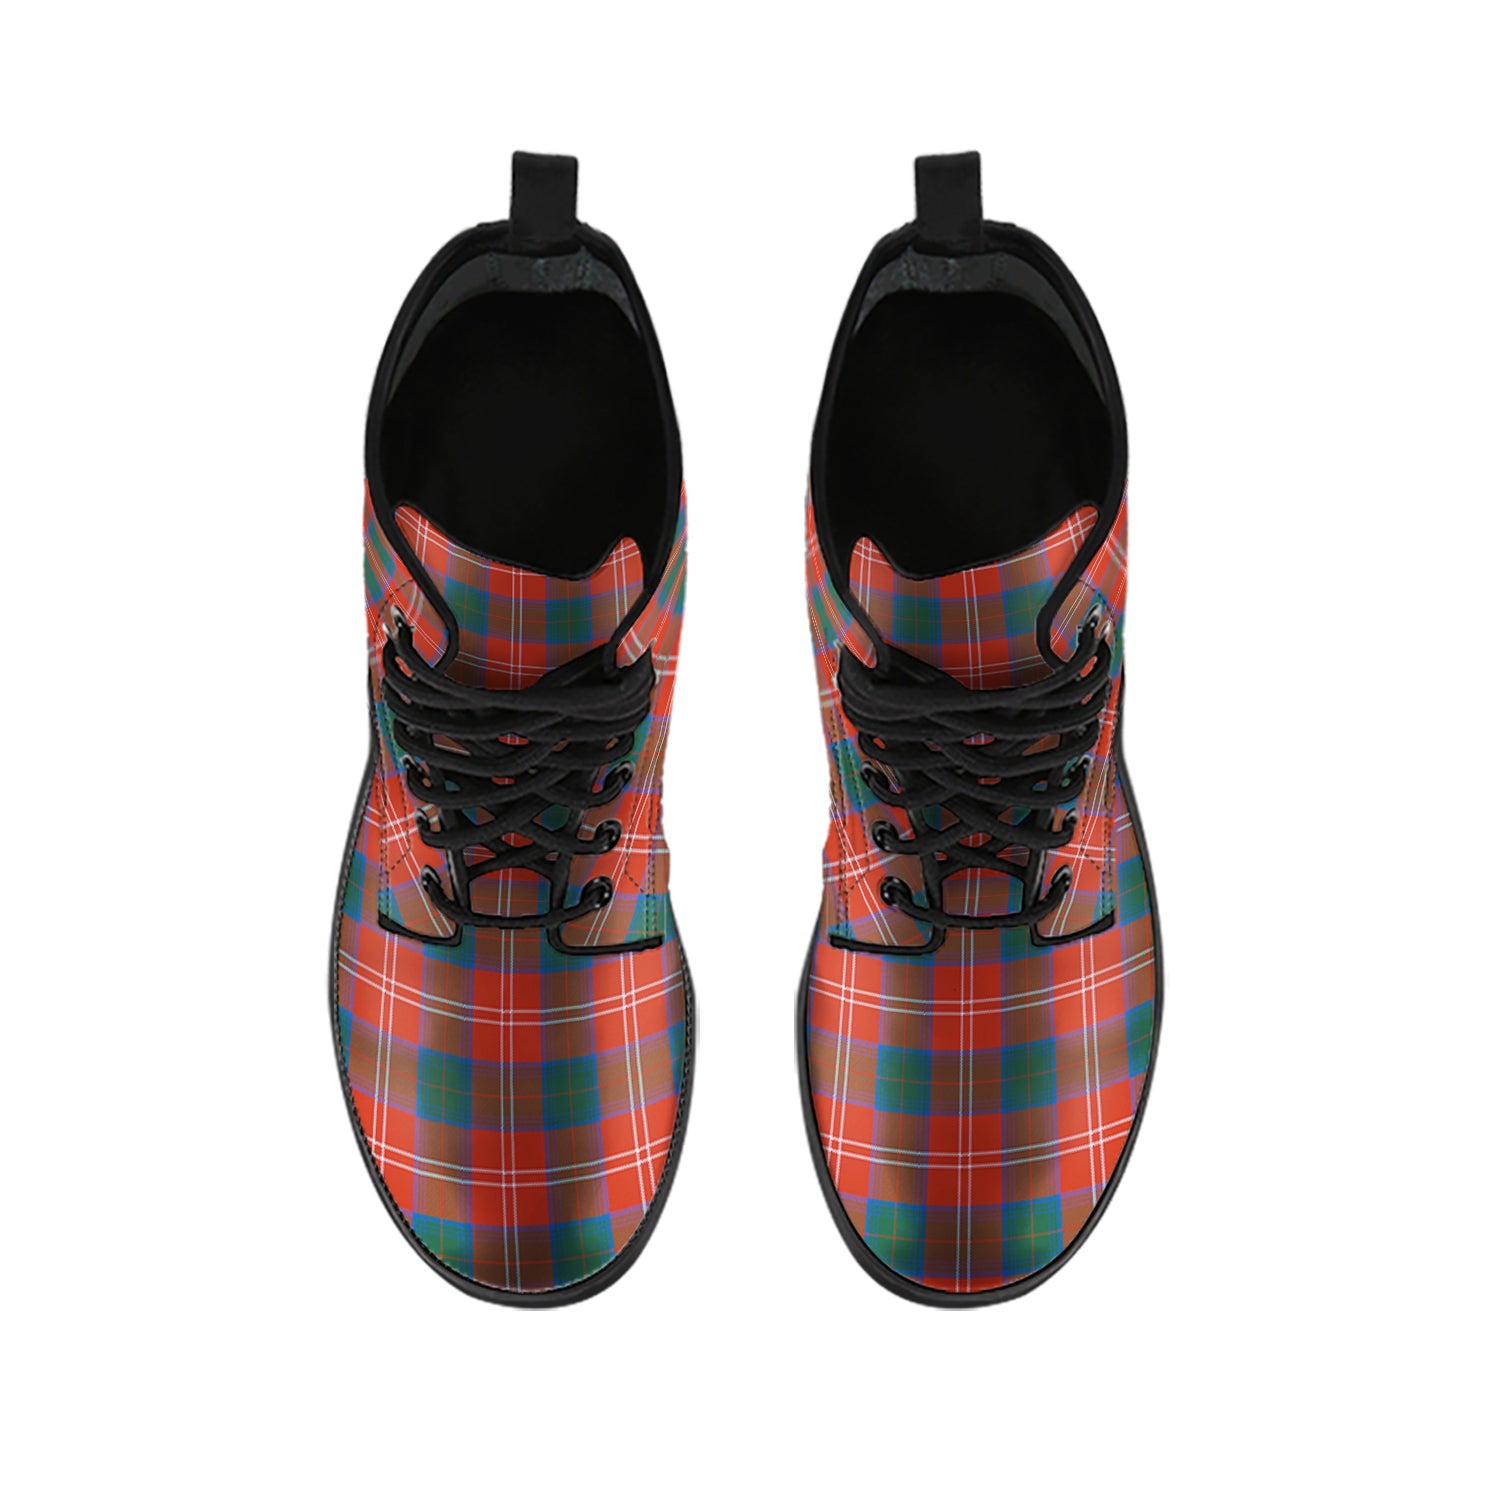 chisholm-ancient-tartan-leather-boots